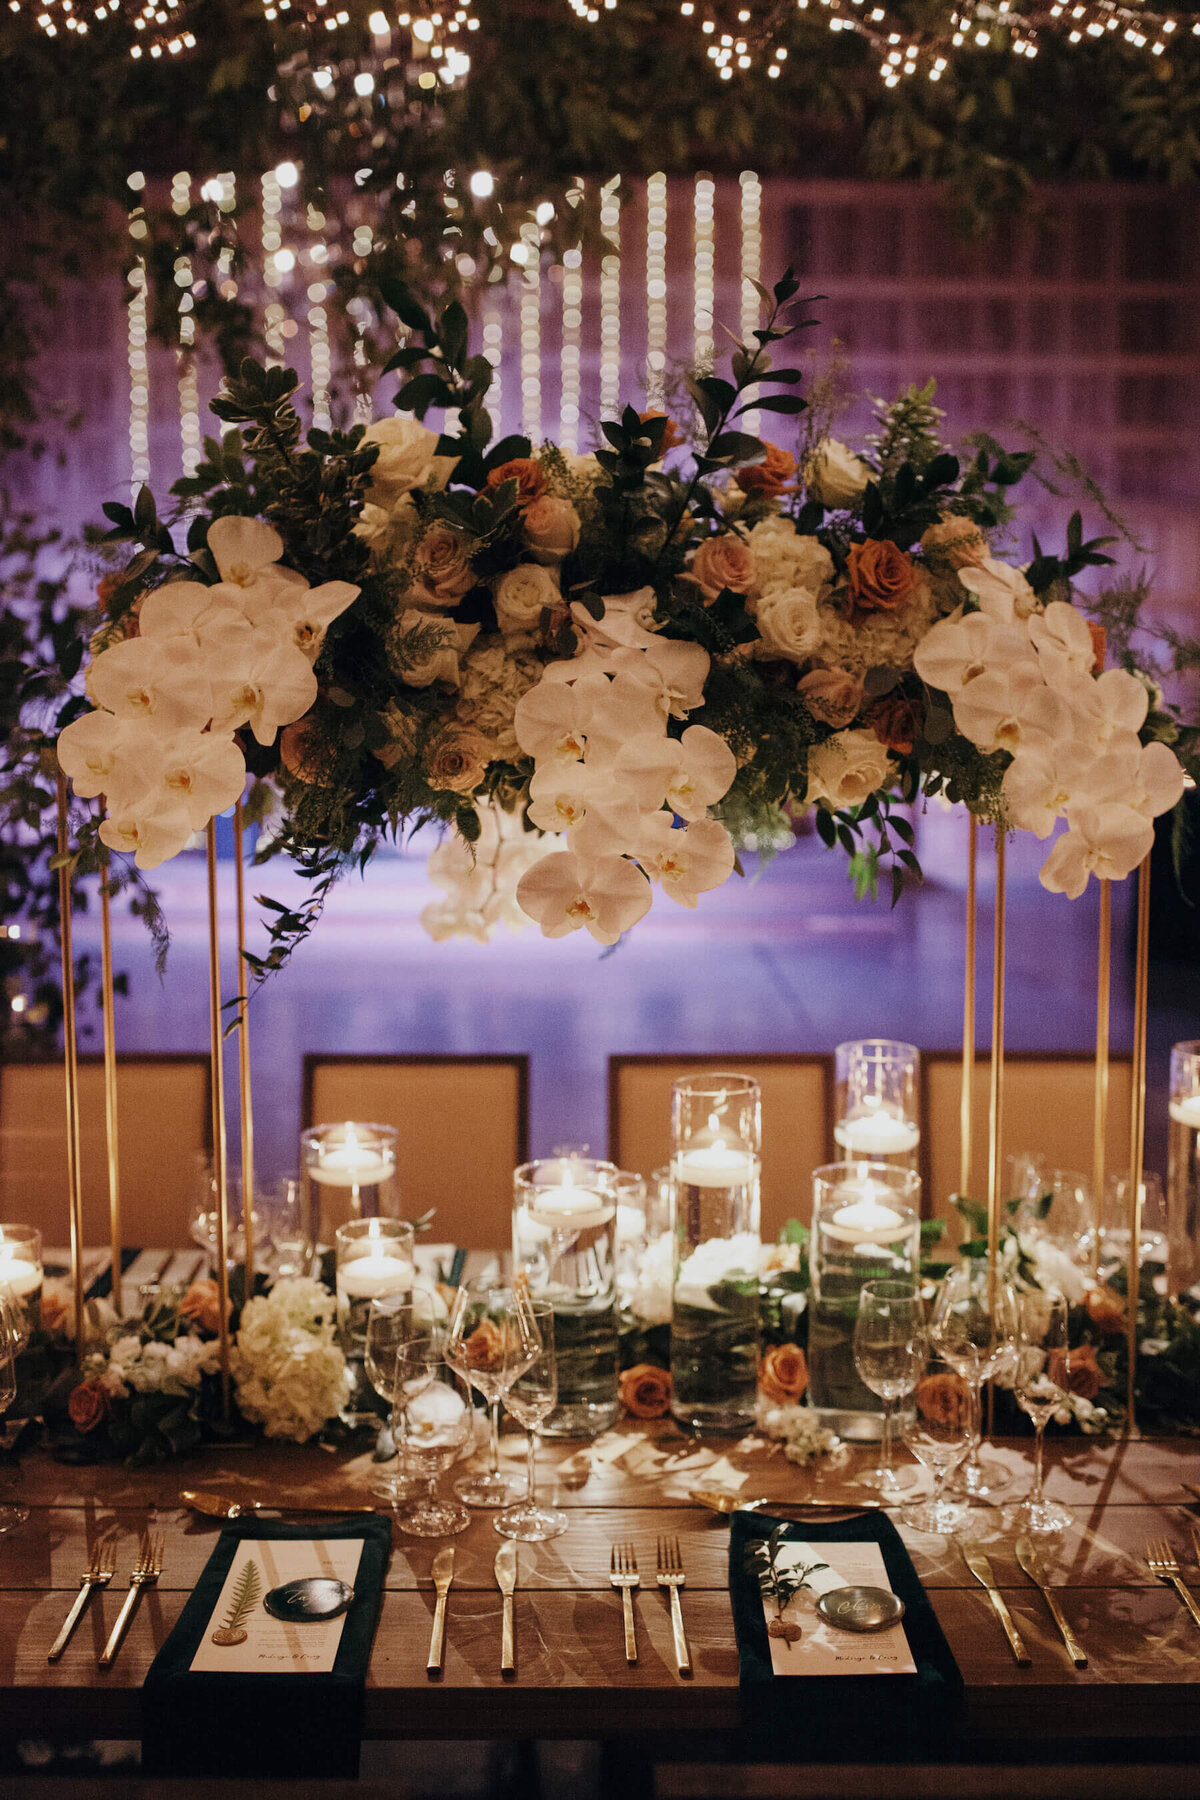 Floating candle centerpieces with white orchids